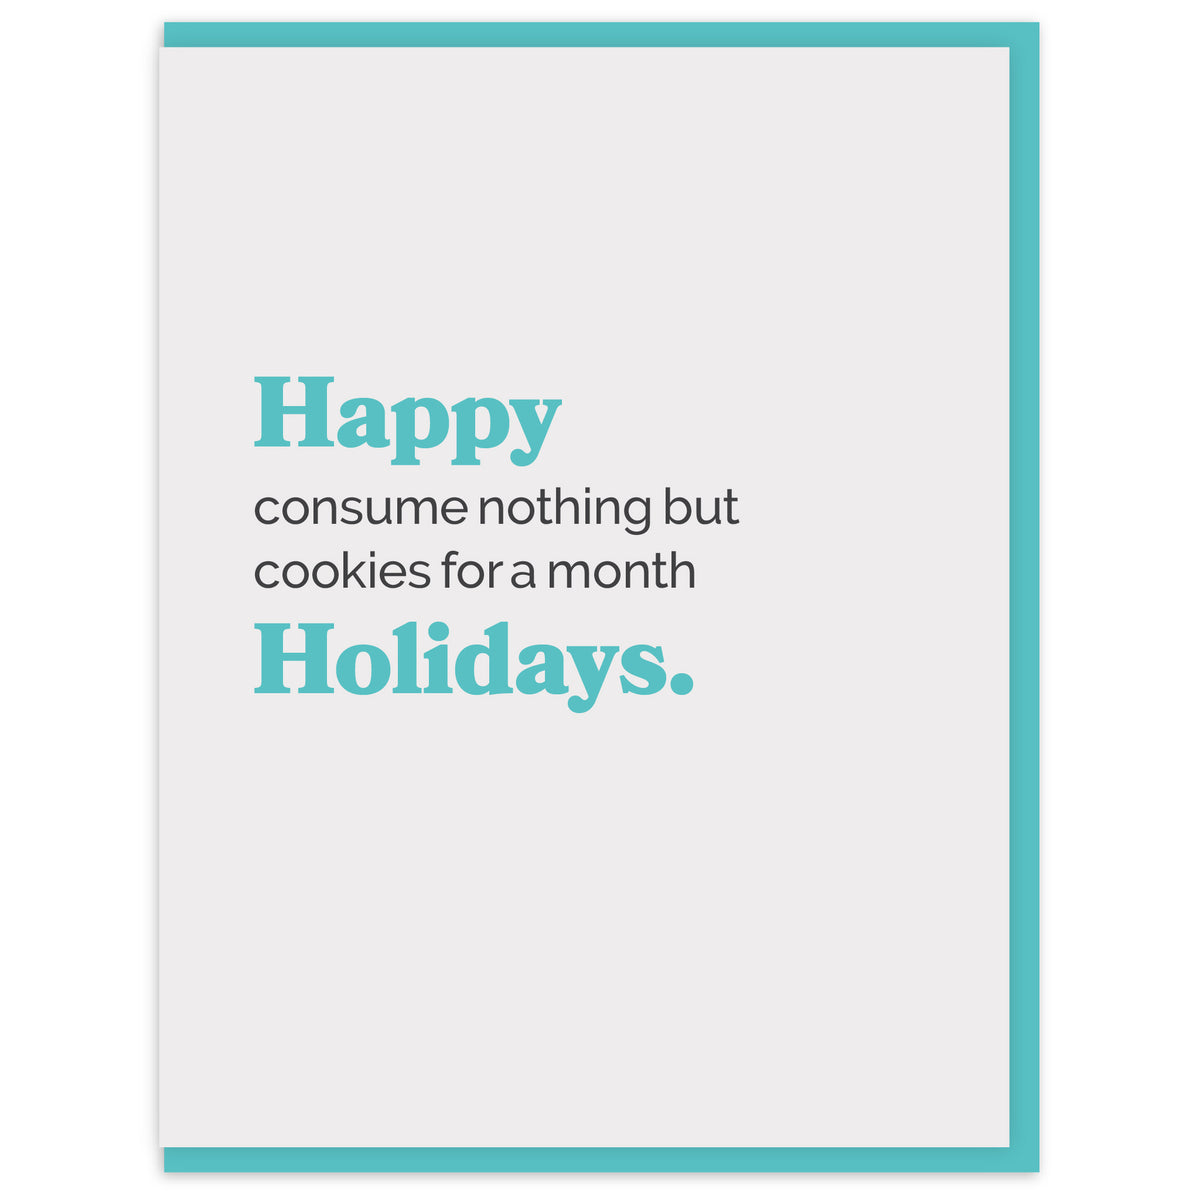 Happy consume nothing but cookies for a month Holidays.